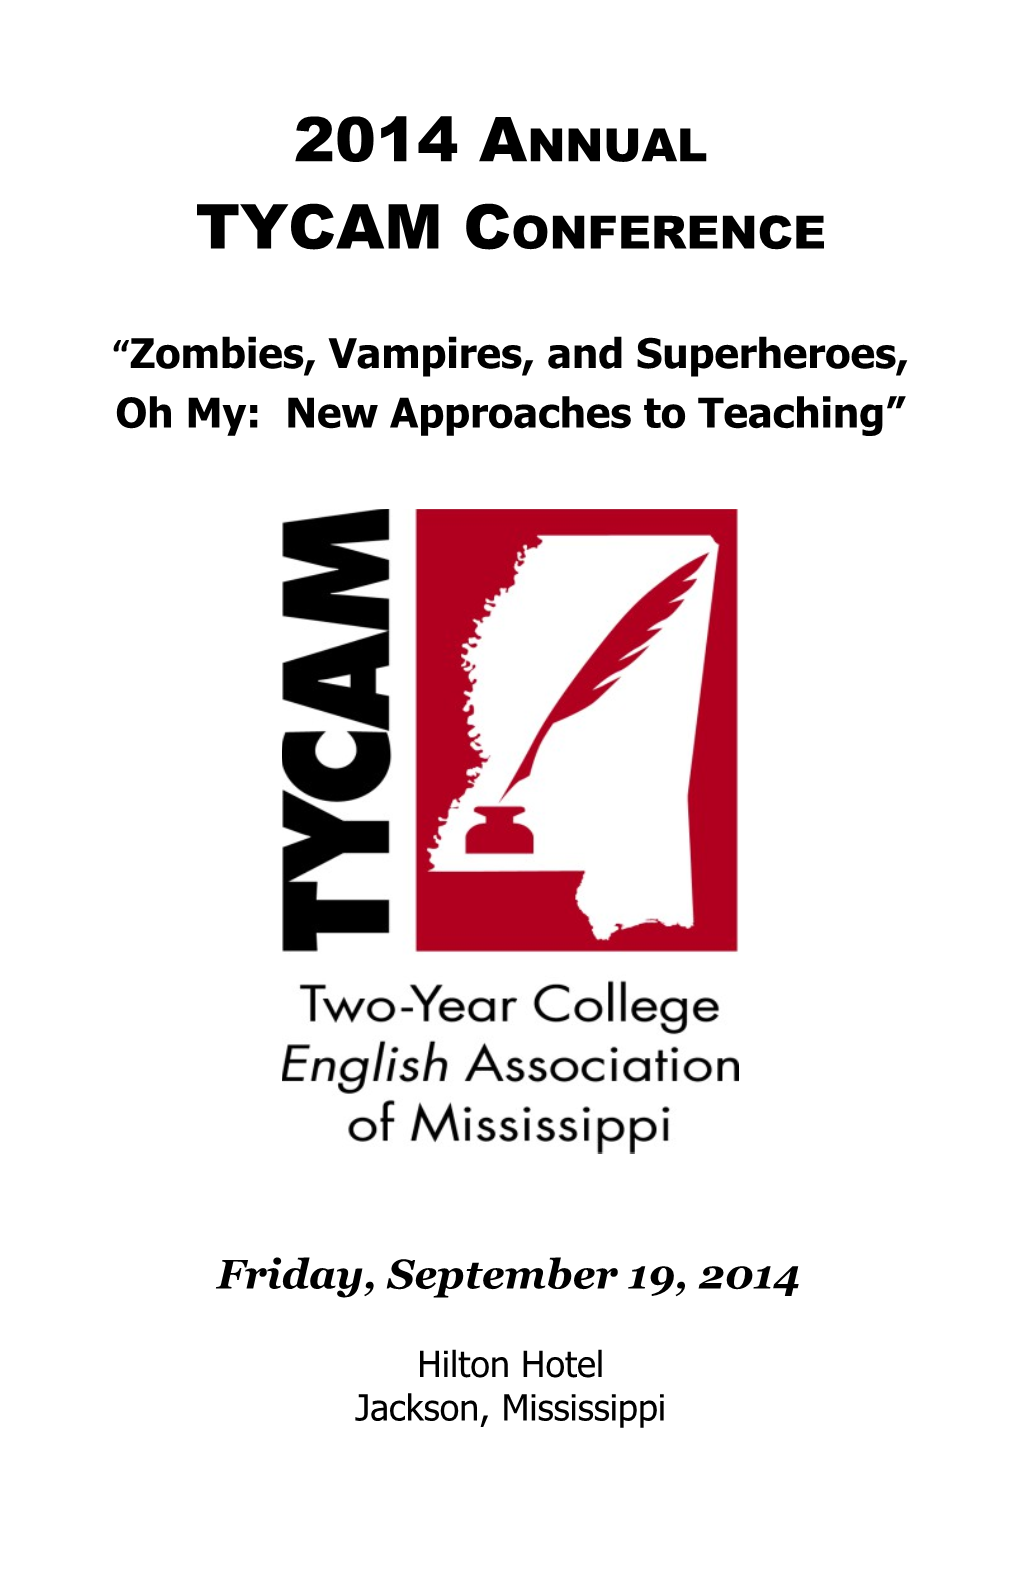 Zombies, Vampires, and Superheroes, Oh My: New Approaches to Teaching